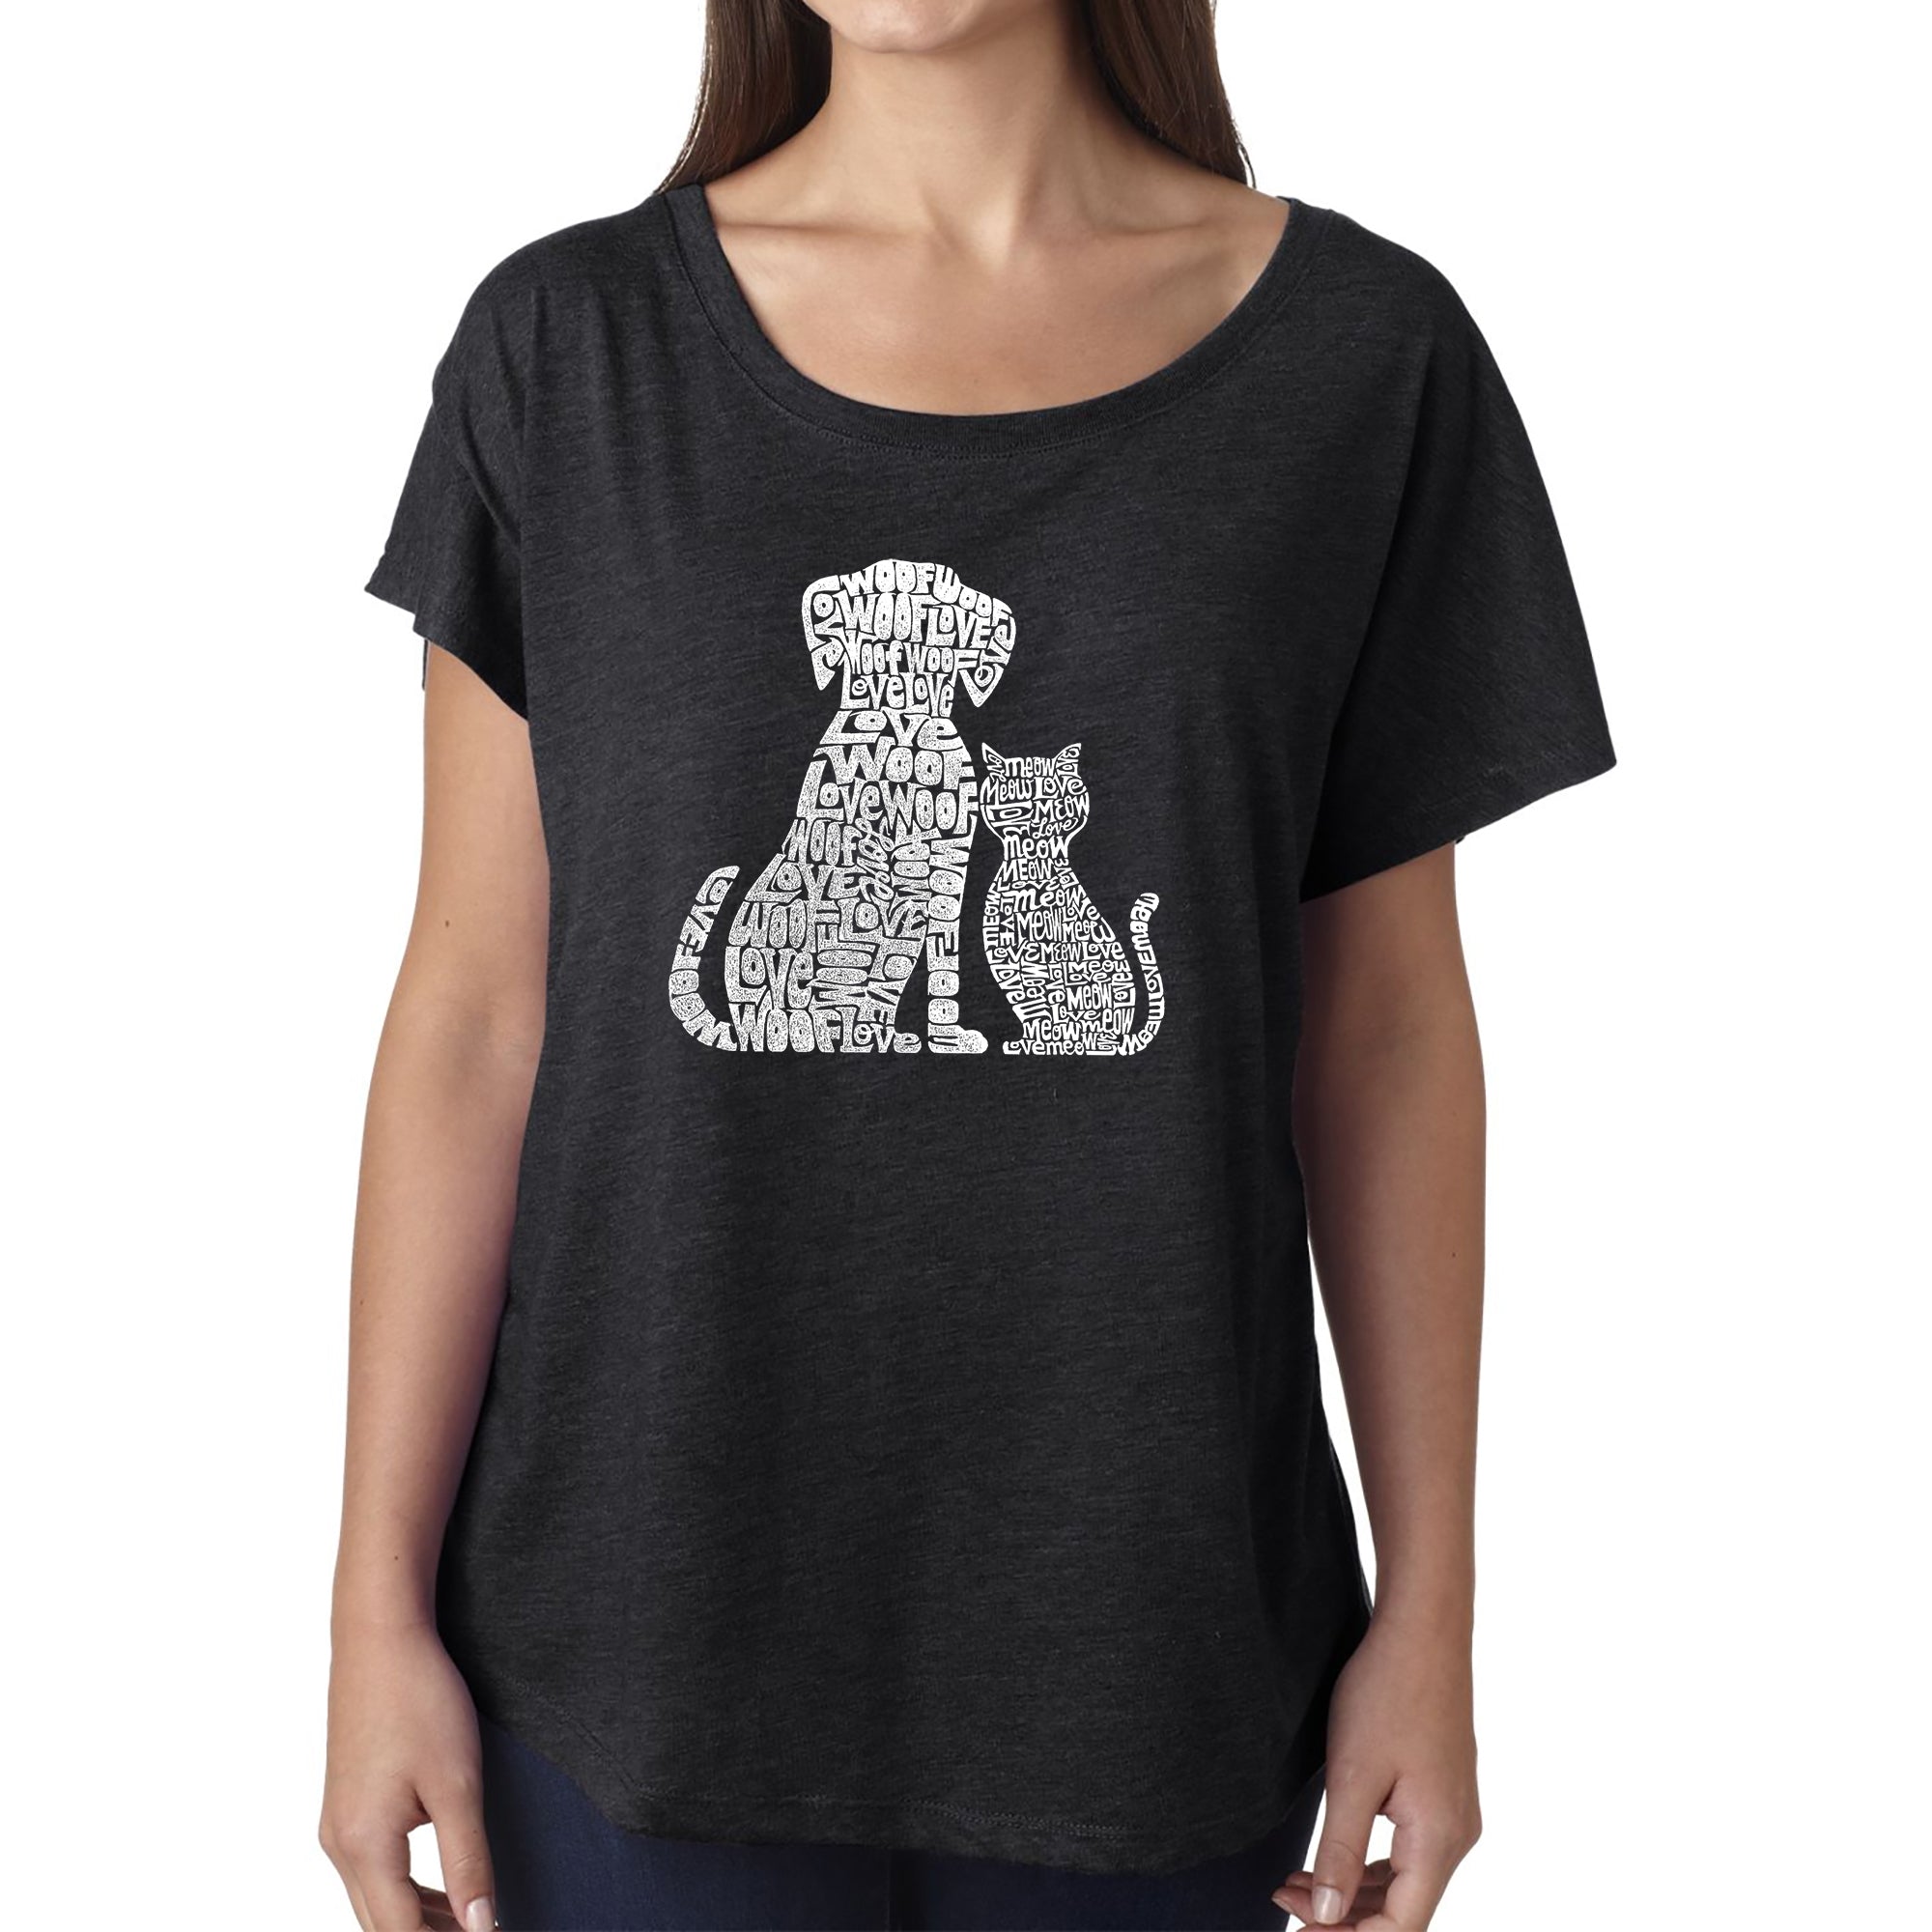 Dogs And Cats - Women's Loose Fit Dolman Cut Word Art Shirt - Black - Large